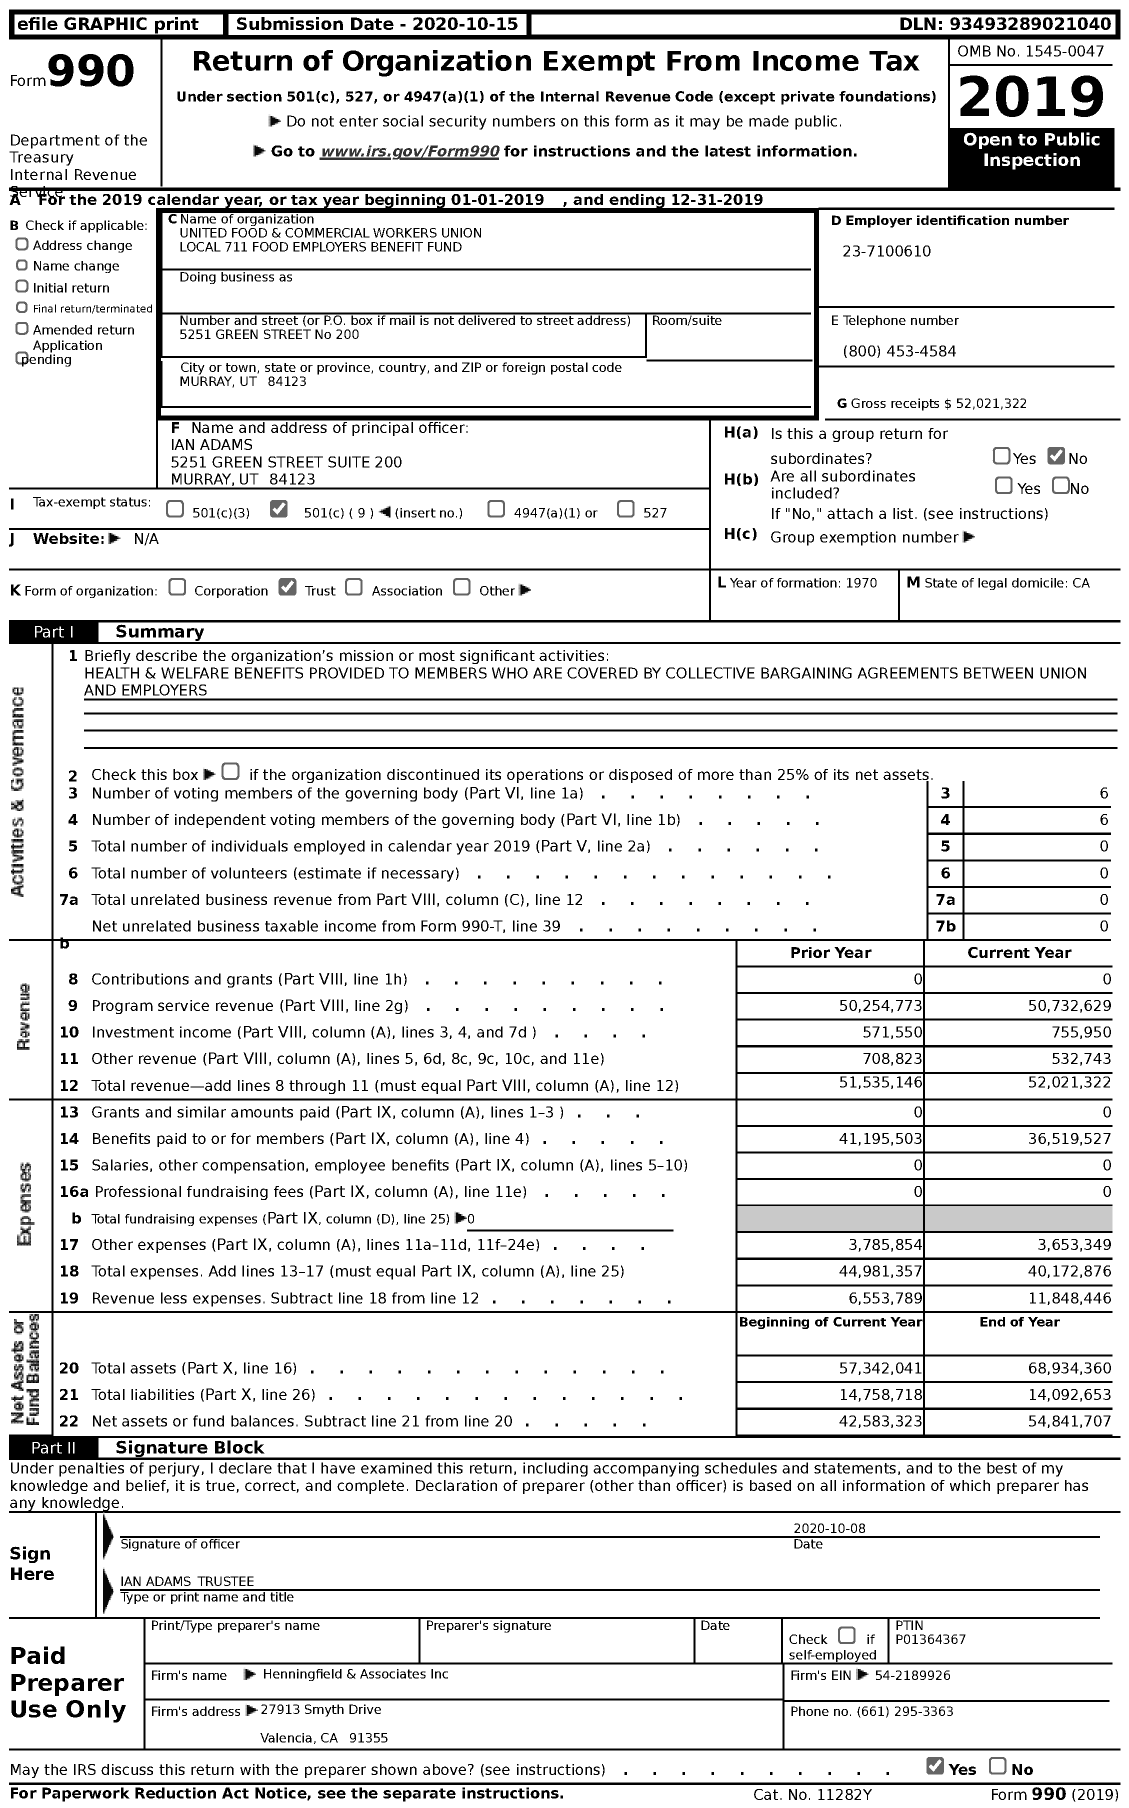 Image of first page of 2019 Form 990 for United Food and Commercial Workers Union Local 711 Food Employers Benefit Fund